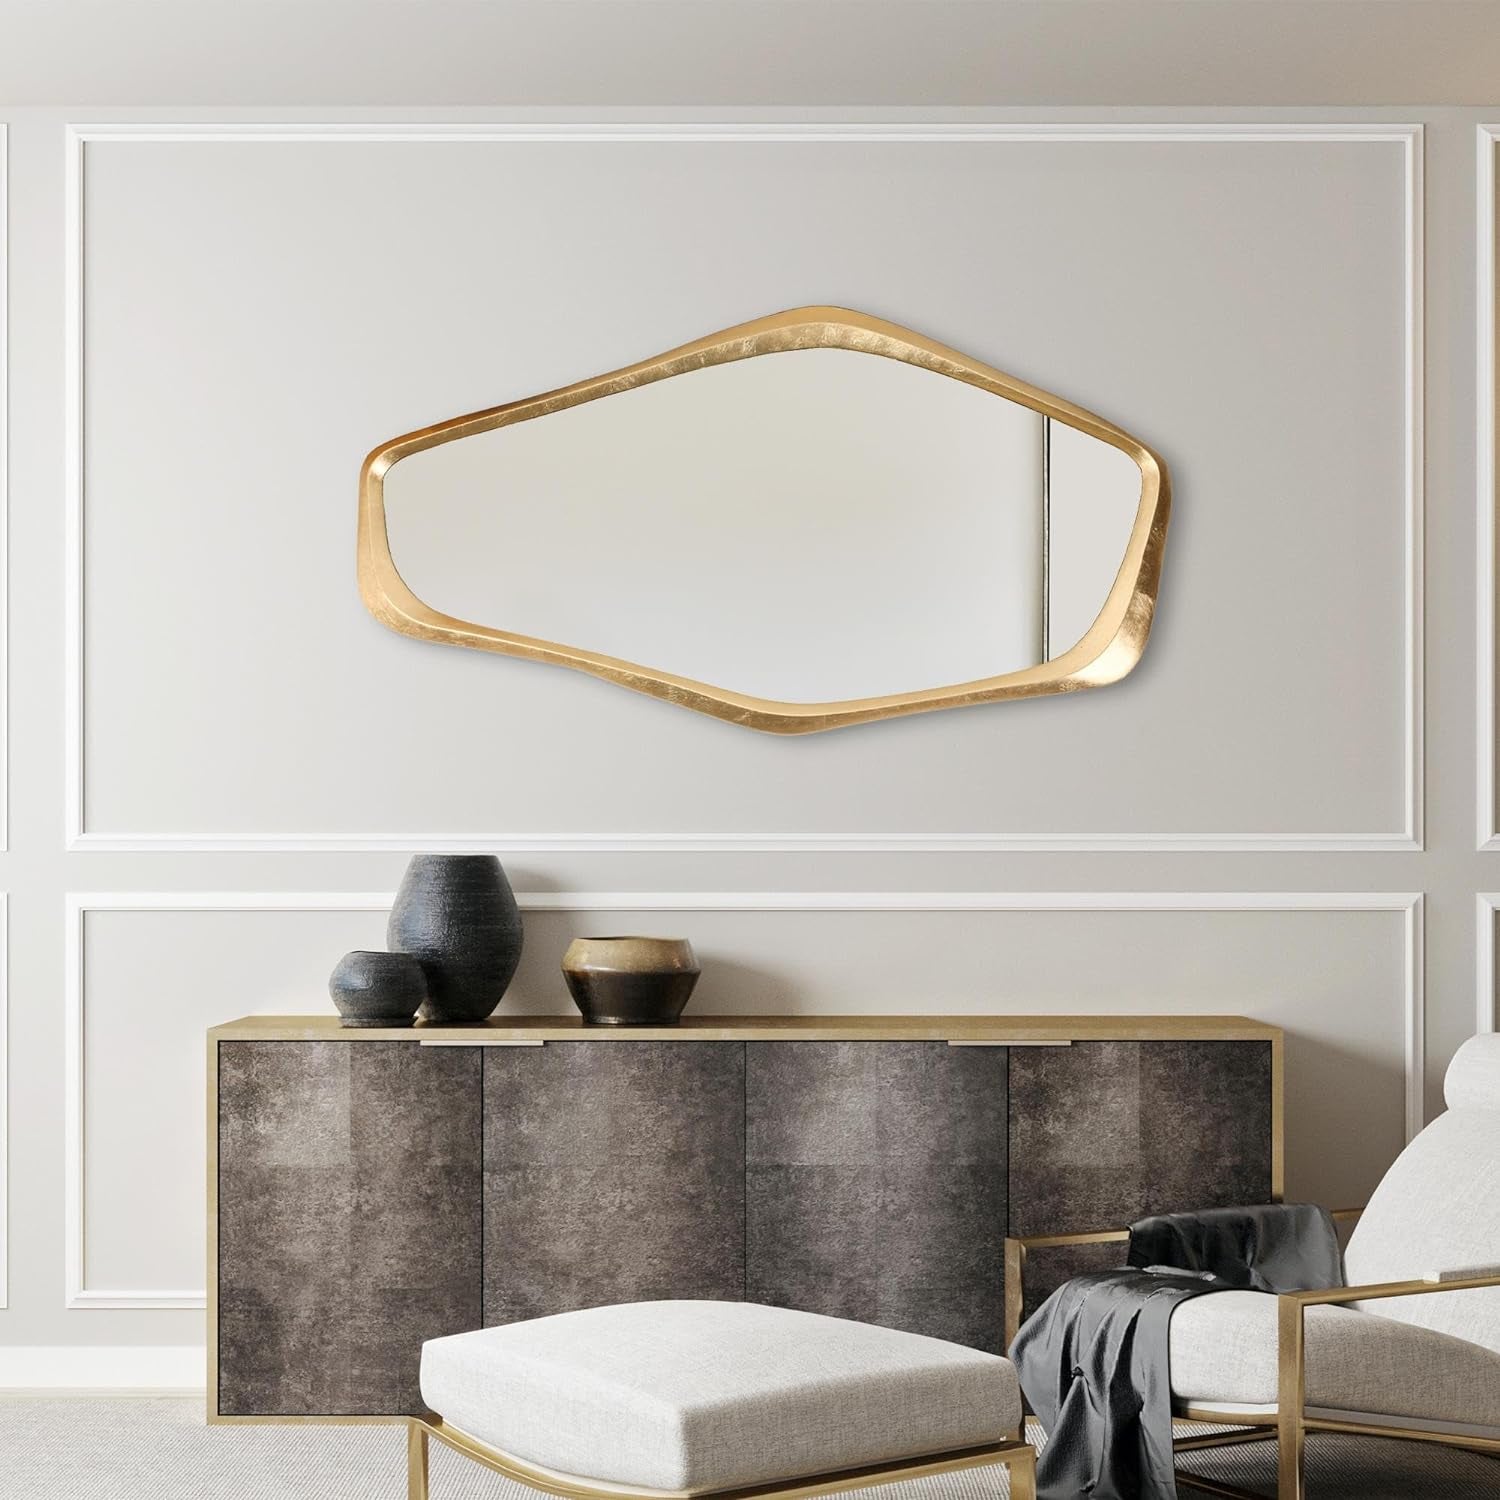 Decorative Gold Wall Mirrors for Bathroom and Living Room Decor - 47.2 H